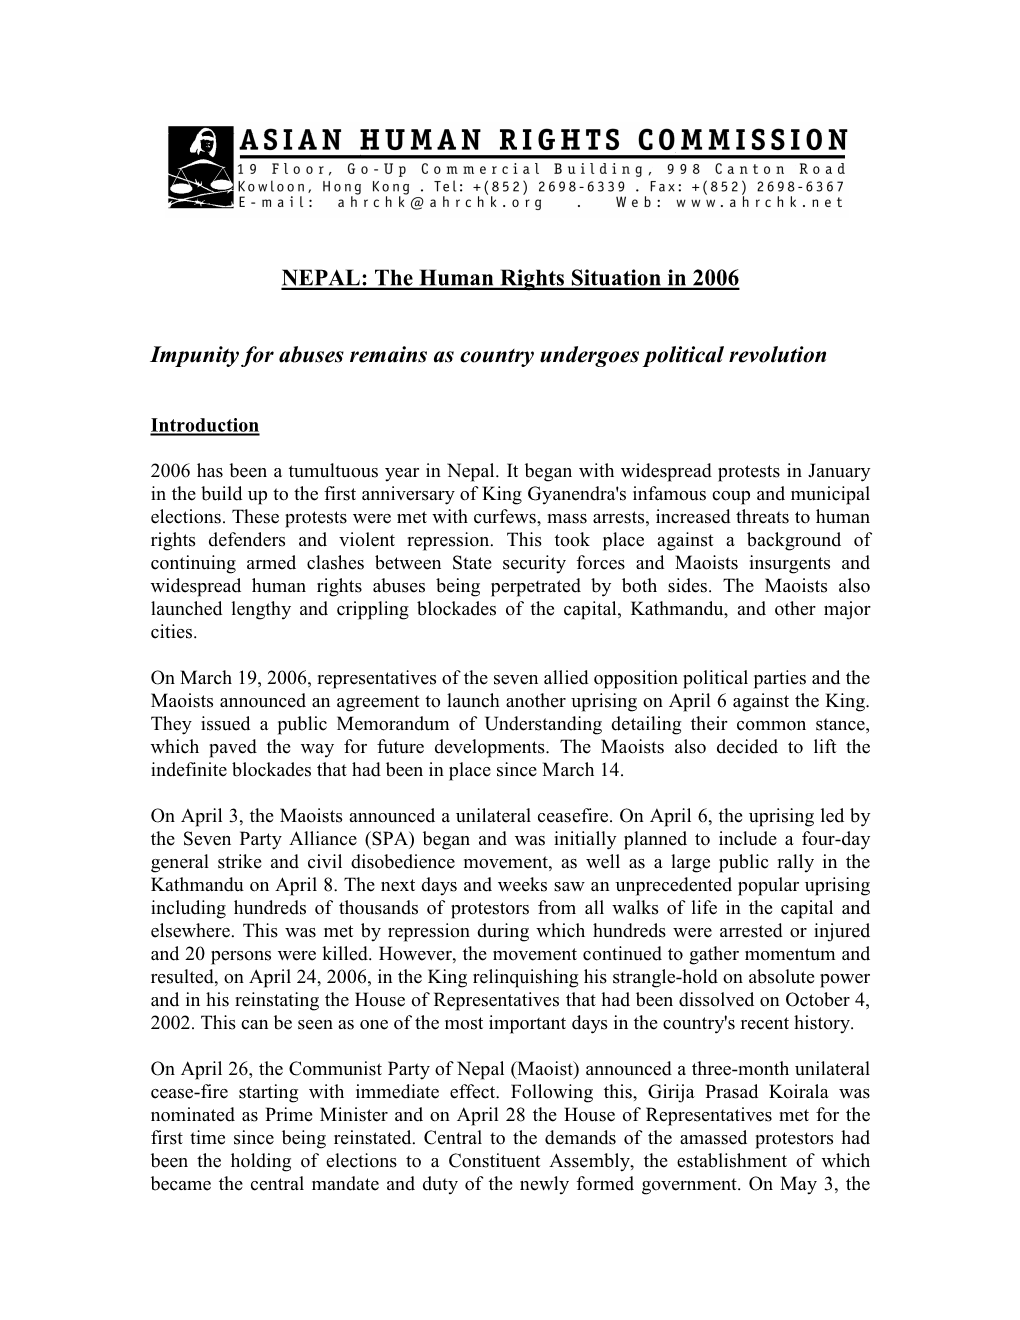 NEPAL: the Human Rights Situation in 2006 Impunity for Abuses